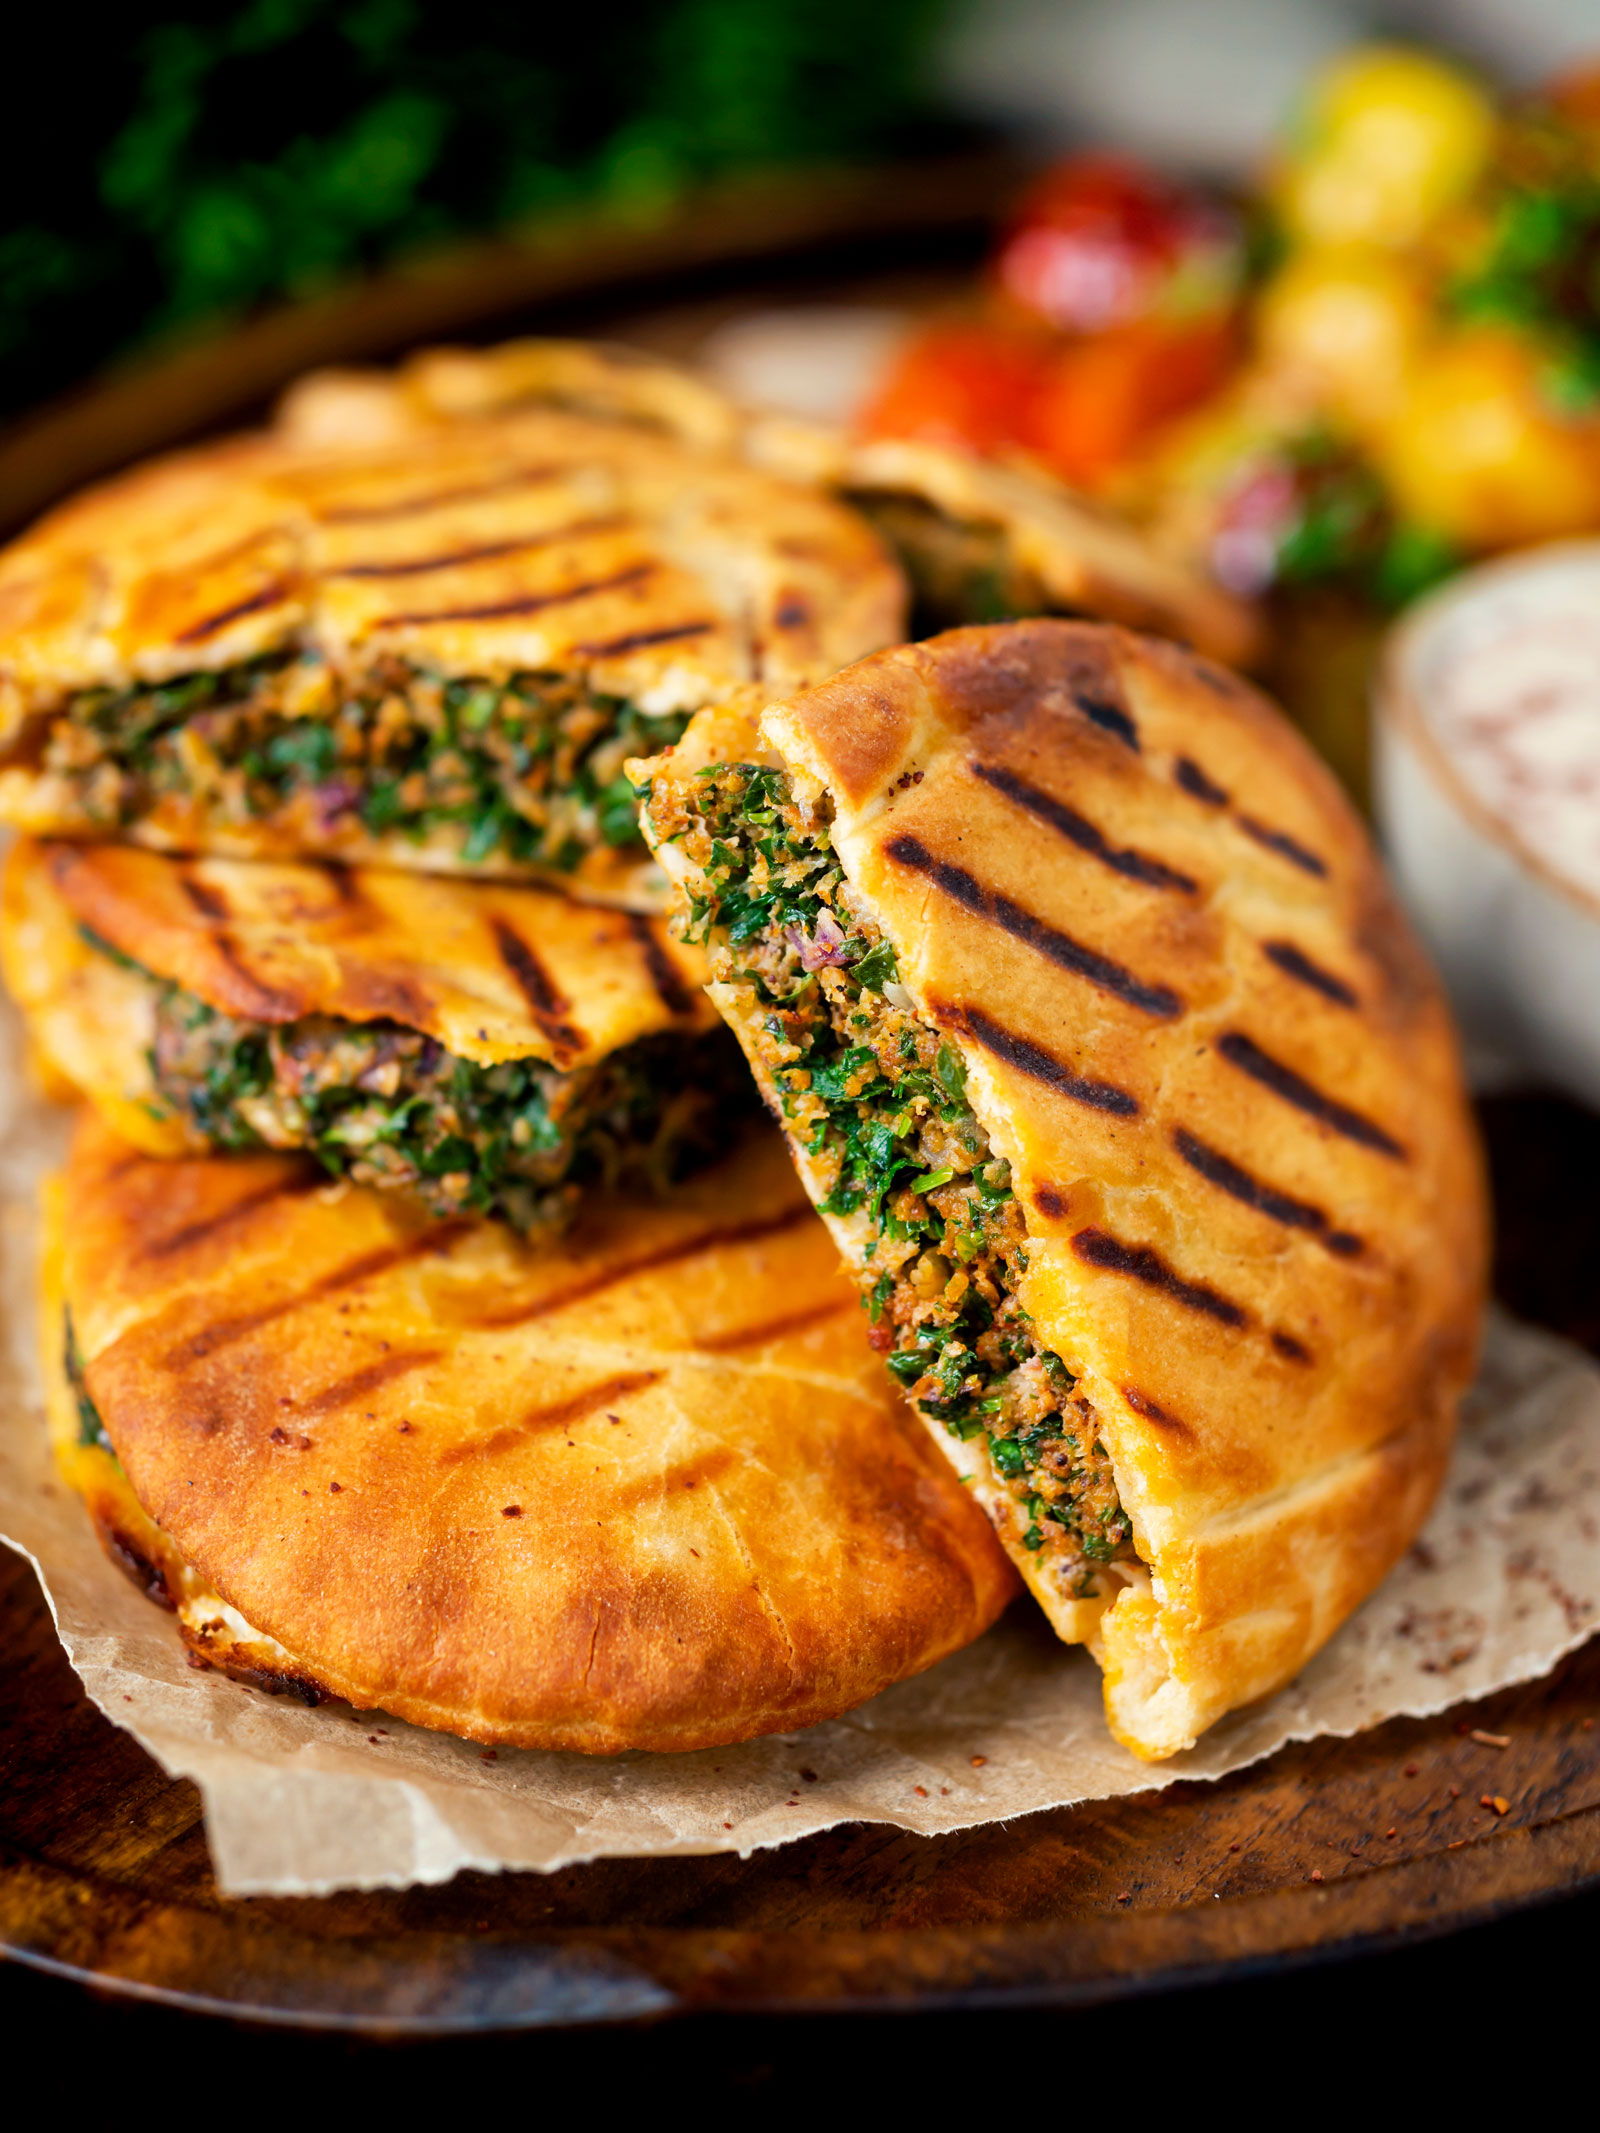 Toasted pita breads stuffed with ground lamb and spices.